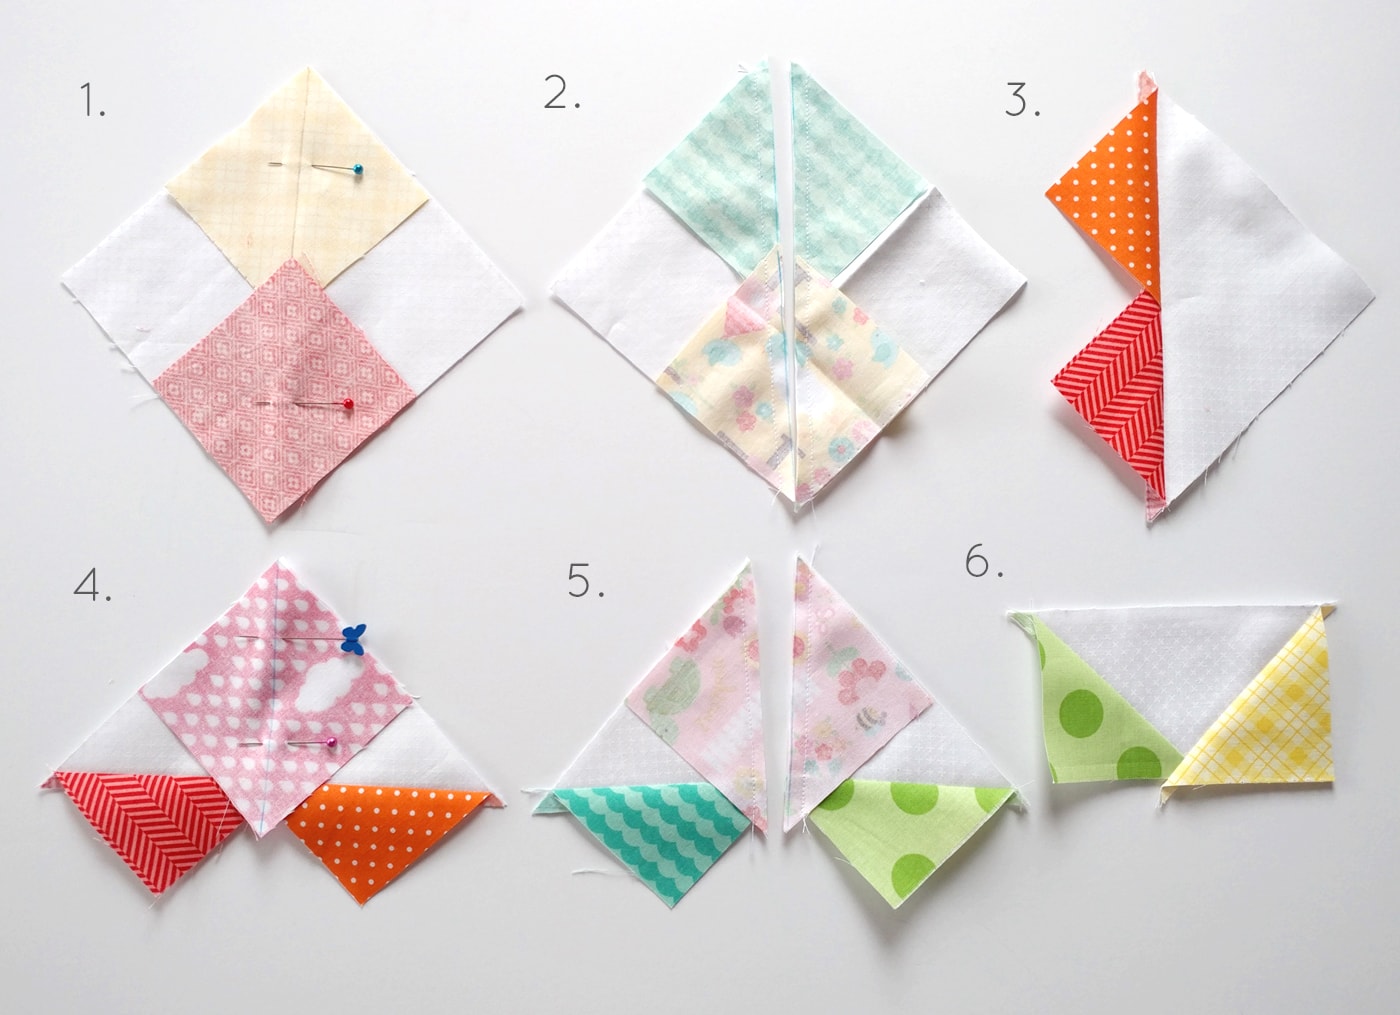 Free Springtime Showers Mini Quilt Pattern; would also be a cute DIY pillow for Spring. #miniquilt #miniquiltpattern